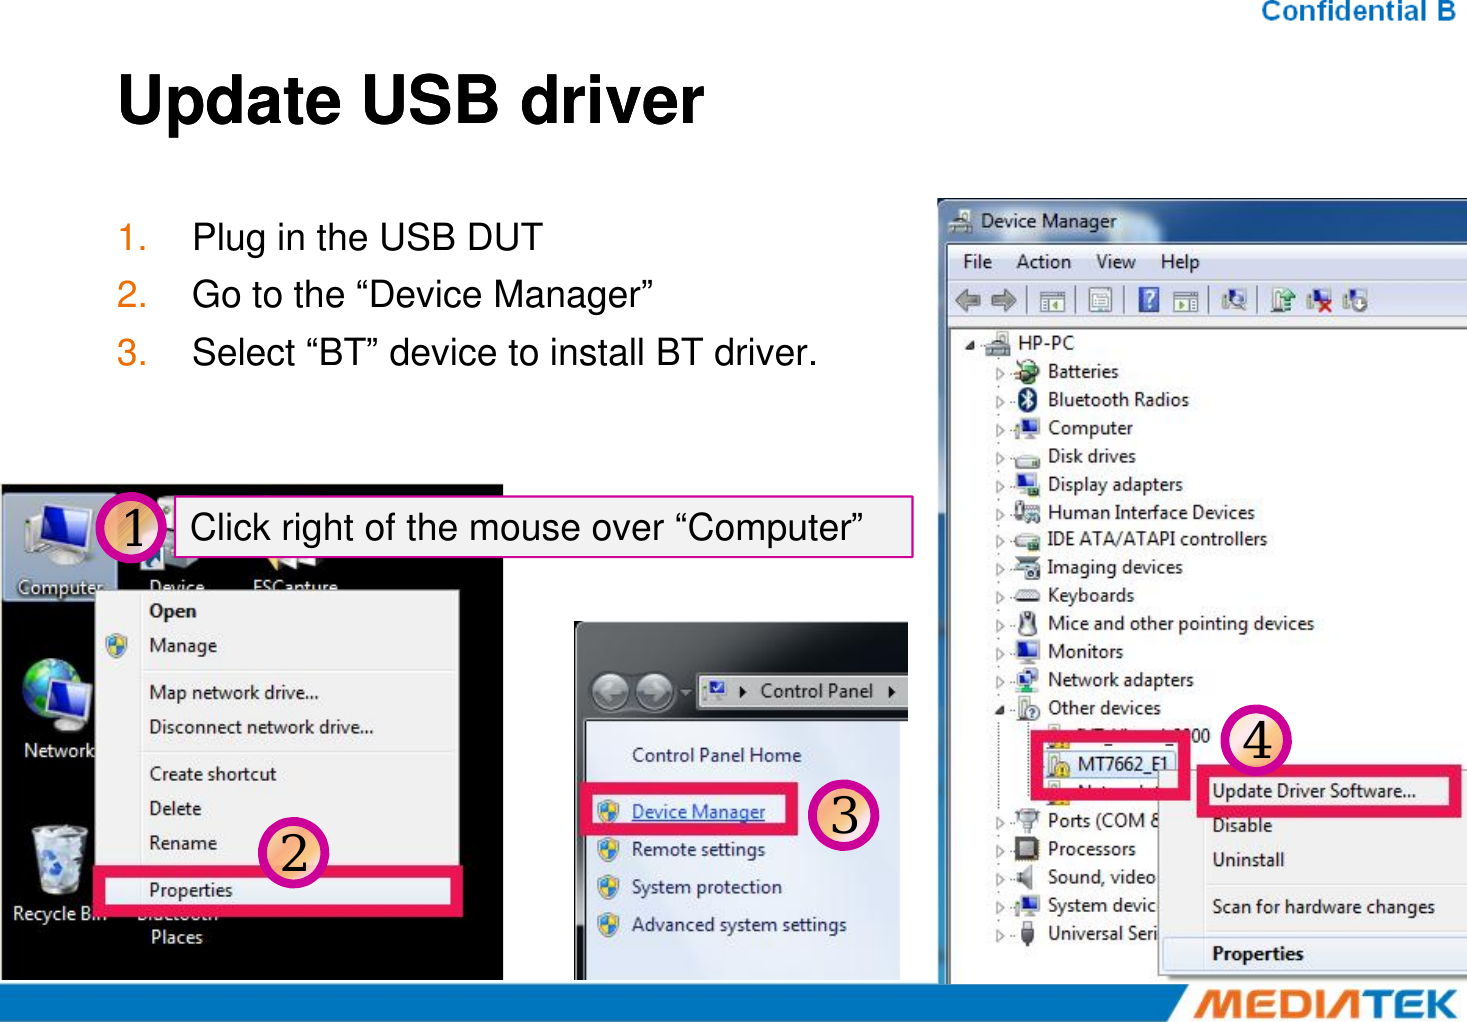 Update USB driverUpdate USB driver1. Plug in the USB DUT2. Go to the “Device Manager”3. Select “BT” device to install BT driver.1Click right of the mouse over “Computer”1Click right of the mouse over “Computer”234